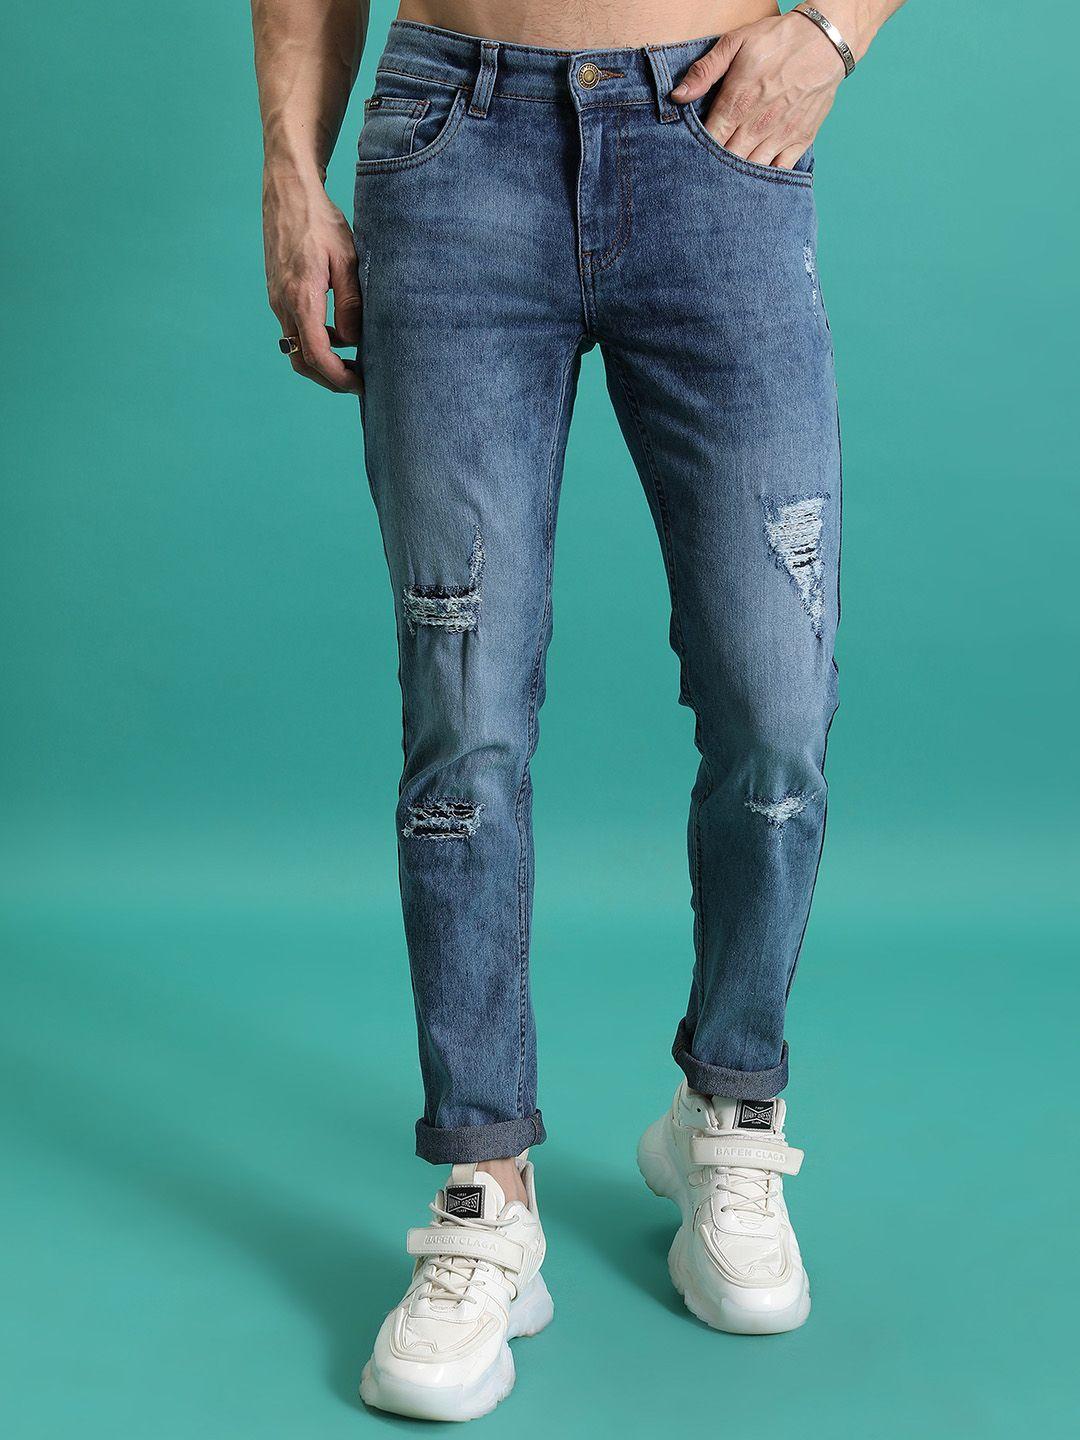 highlander-men-blue-skinny-fit-mid-rise-heavy-fade-mildly-distressed-stretchable-jeans